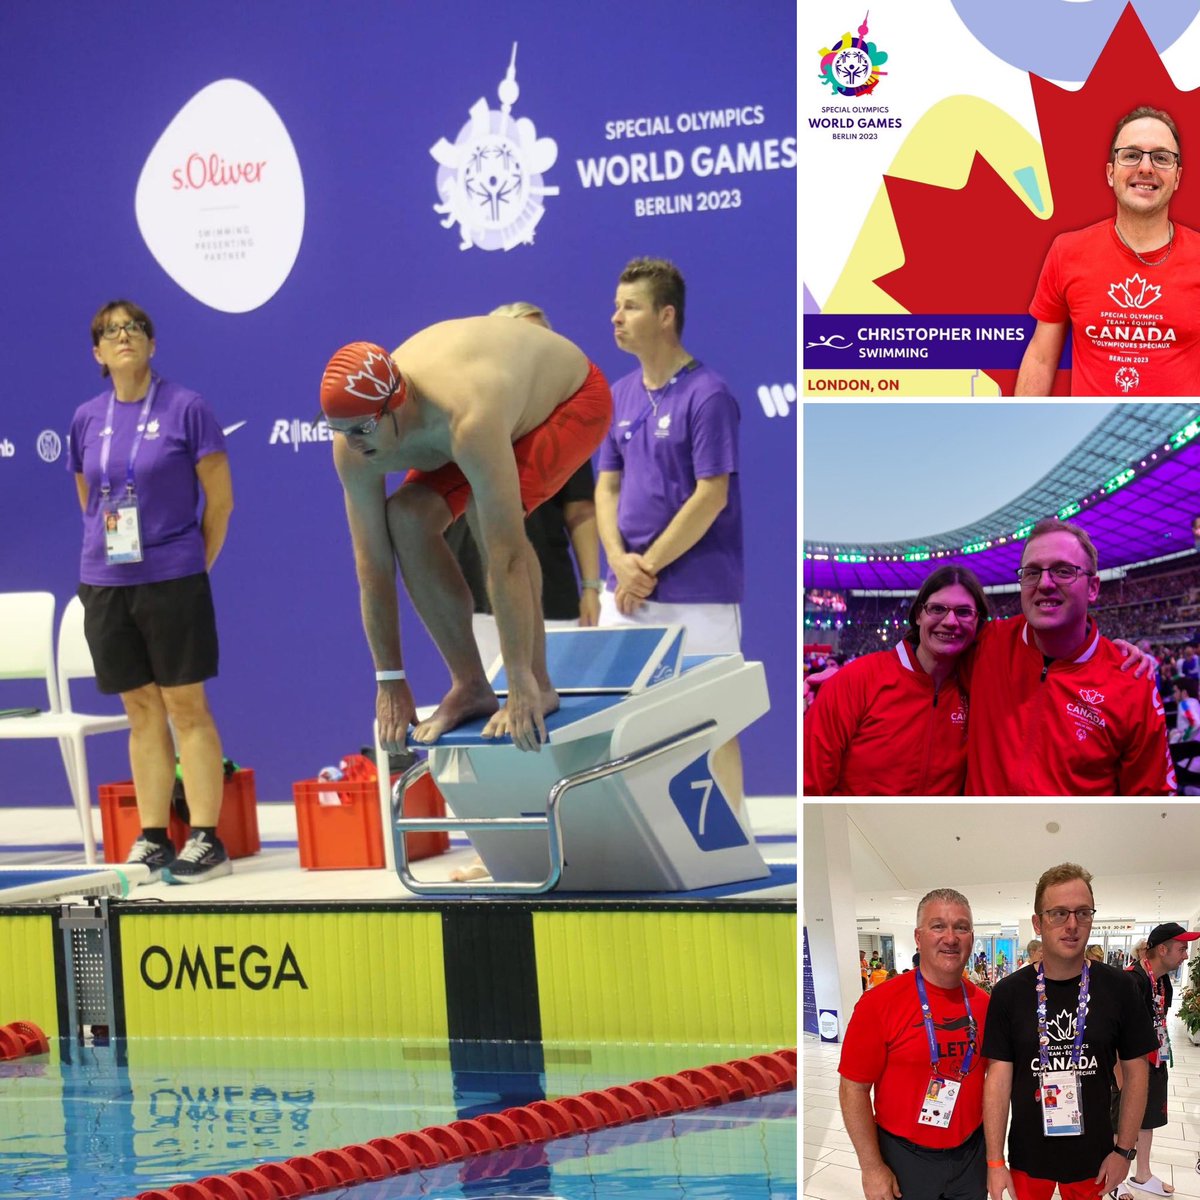 We would like to congratulate @SOOLondonCan athlete Chris Innes for an outstanding effort representing Canada at the 2023 World Games in Berlin! A lot of hard work and training paid off Chris!!